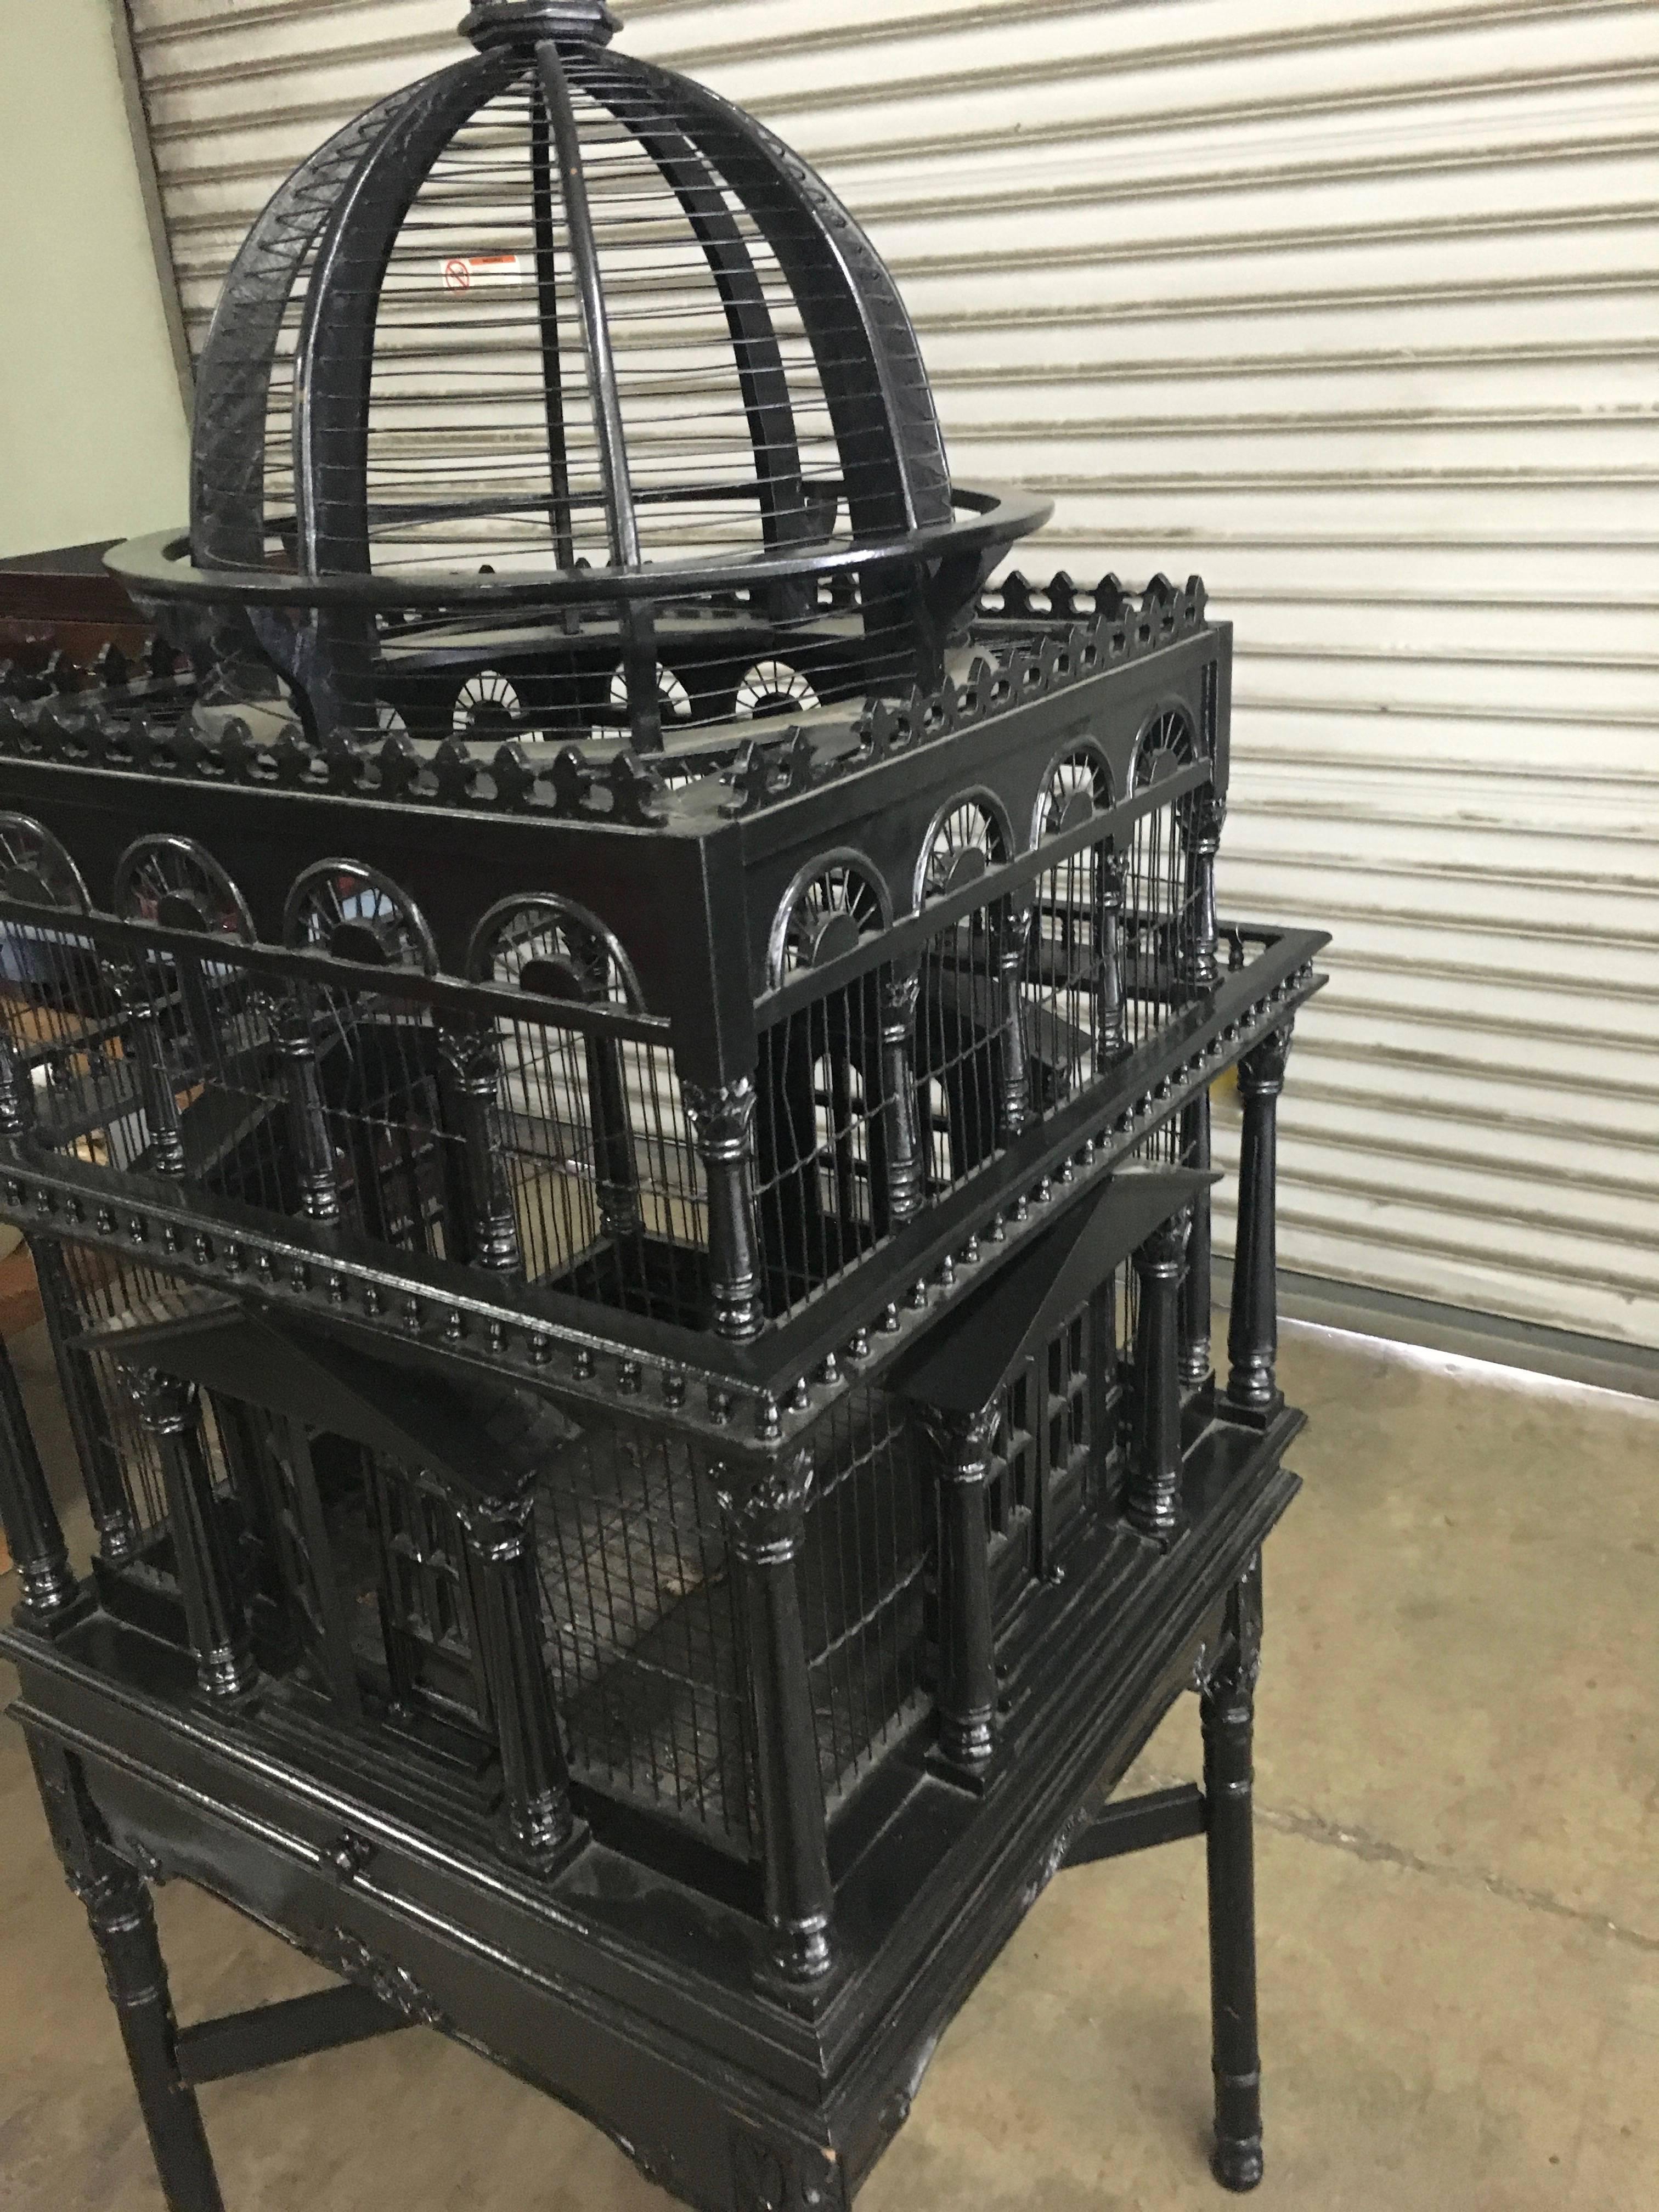 Stunning and exquisitely designed and architecturally fascinating bird cage perfect for the solarium, den or, let's face it, any room in the house or covered garden Lanai!

A perfect home for your love birds, parakeet or just a stunning